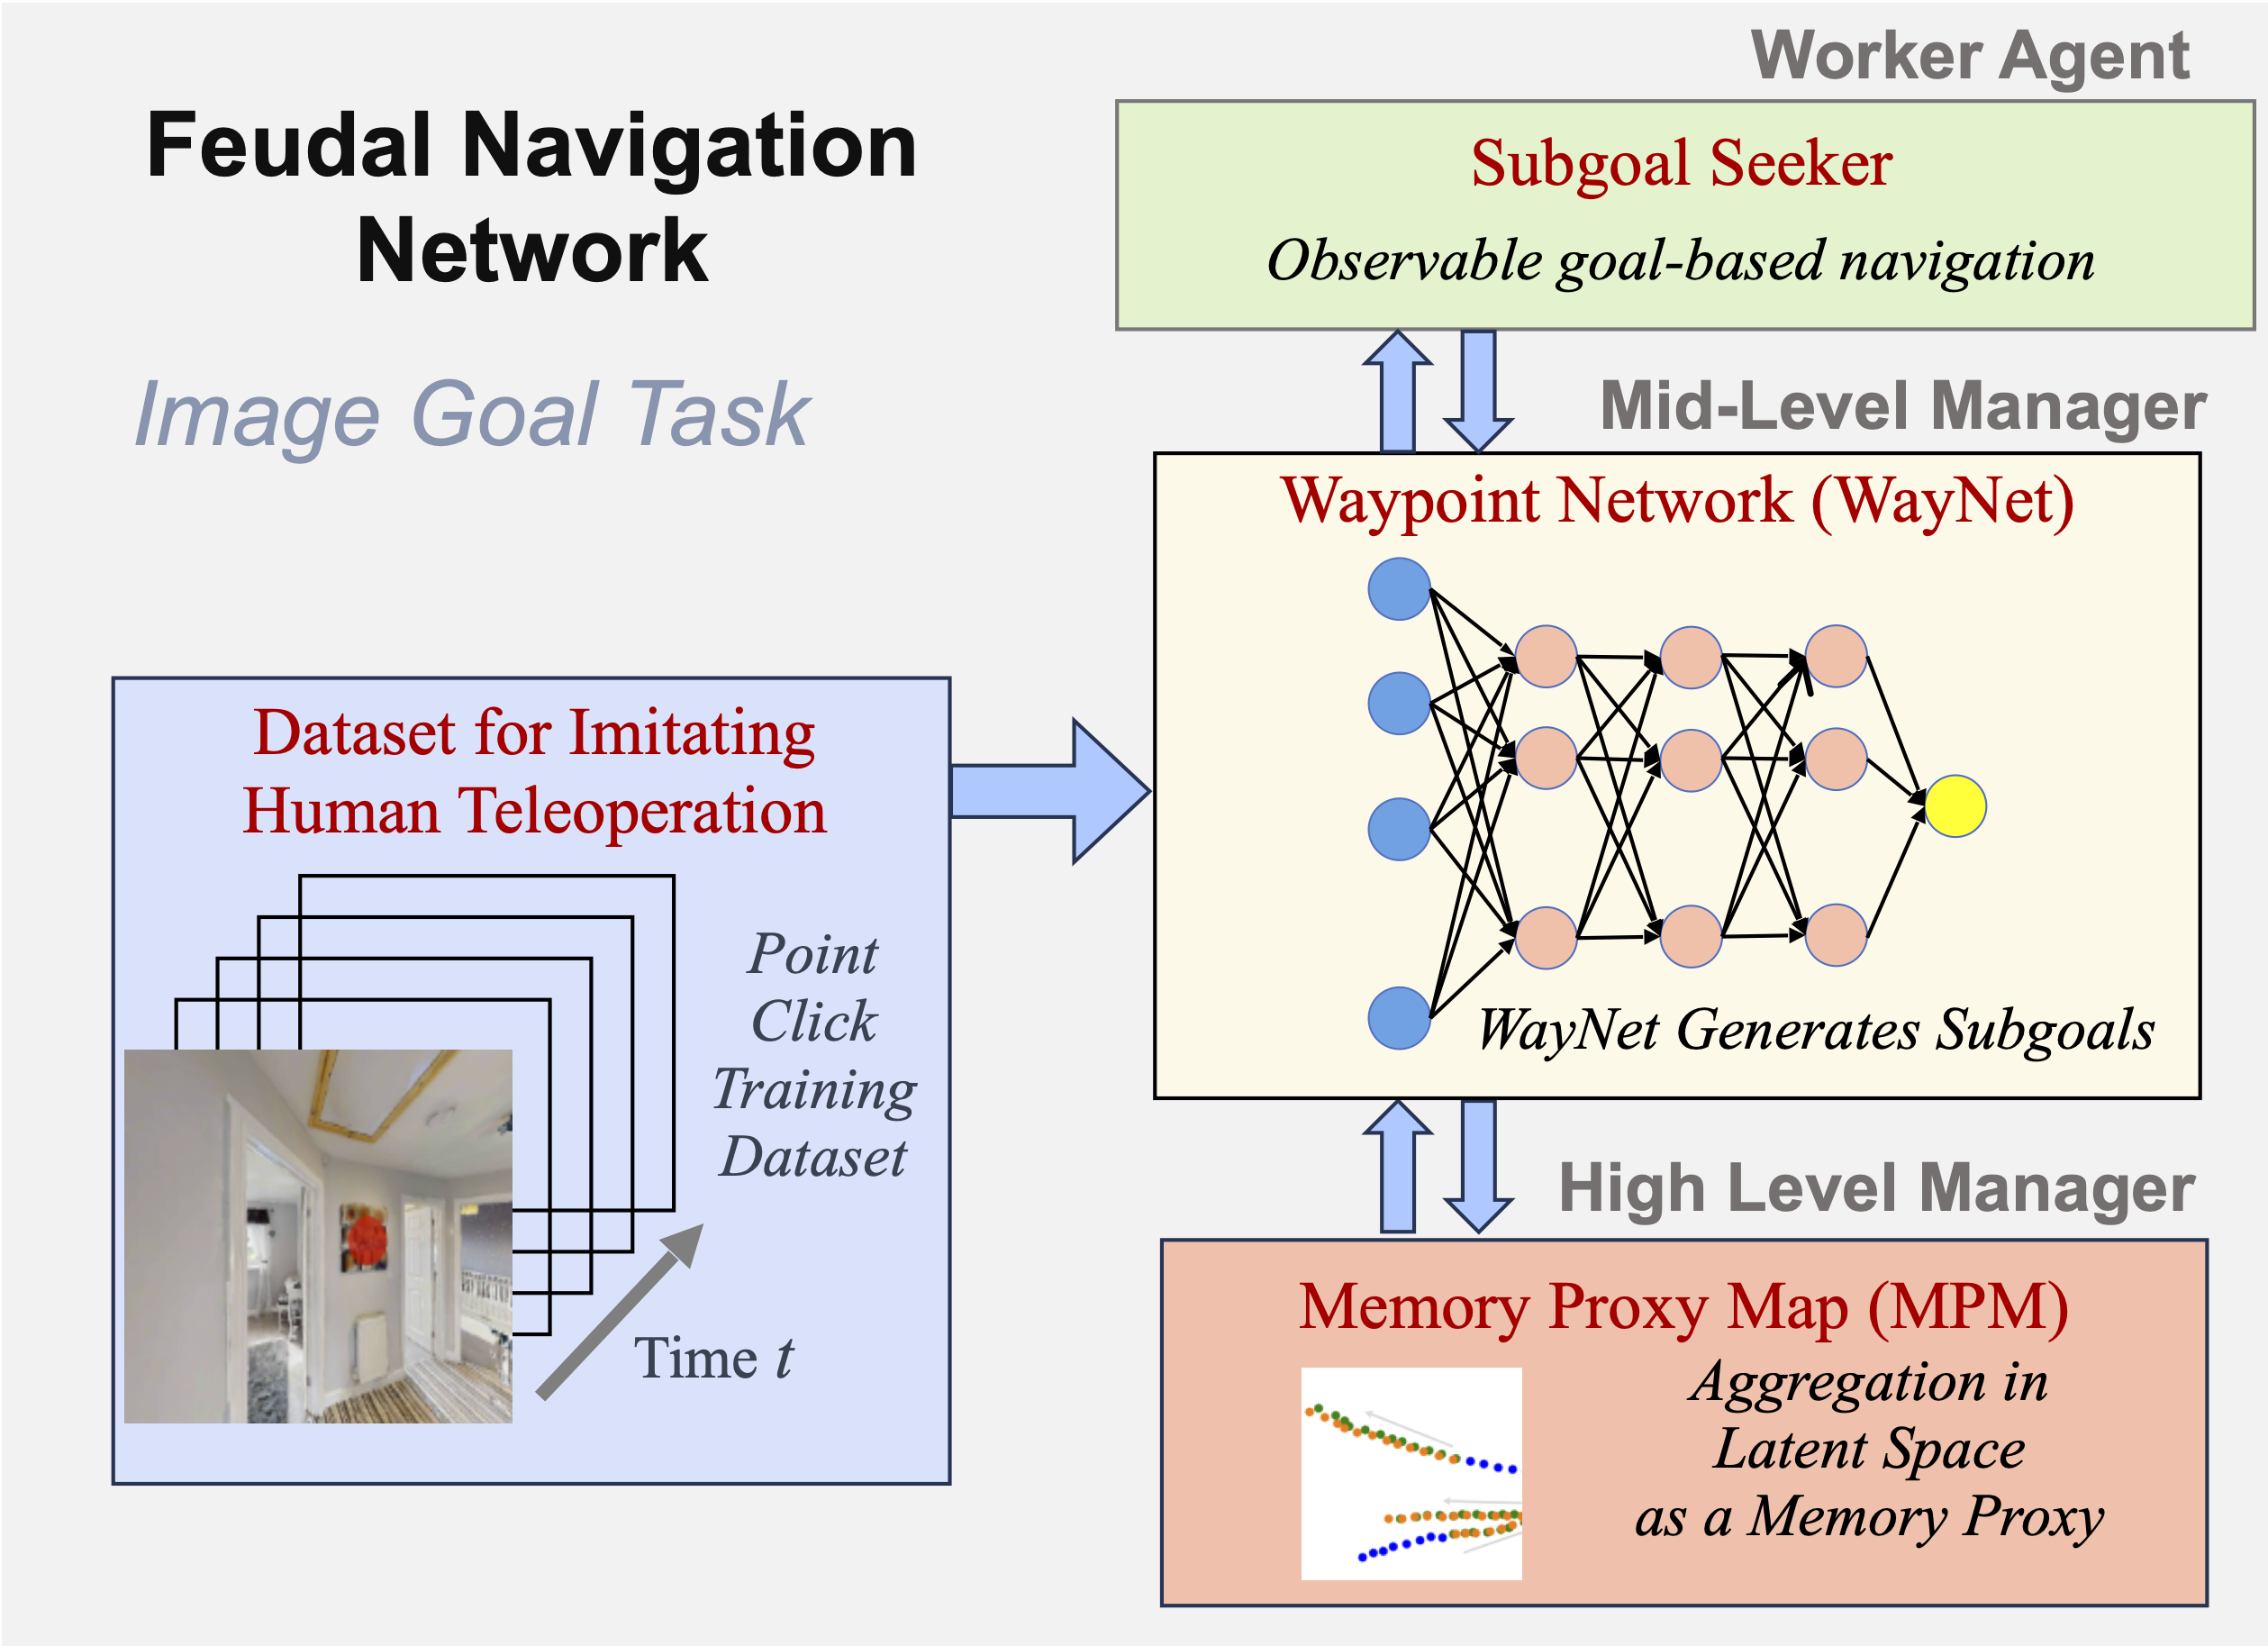 Feudal Networks for Visual Navigation